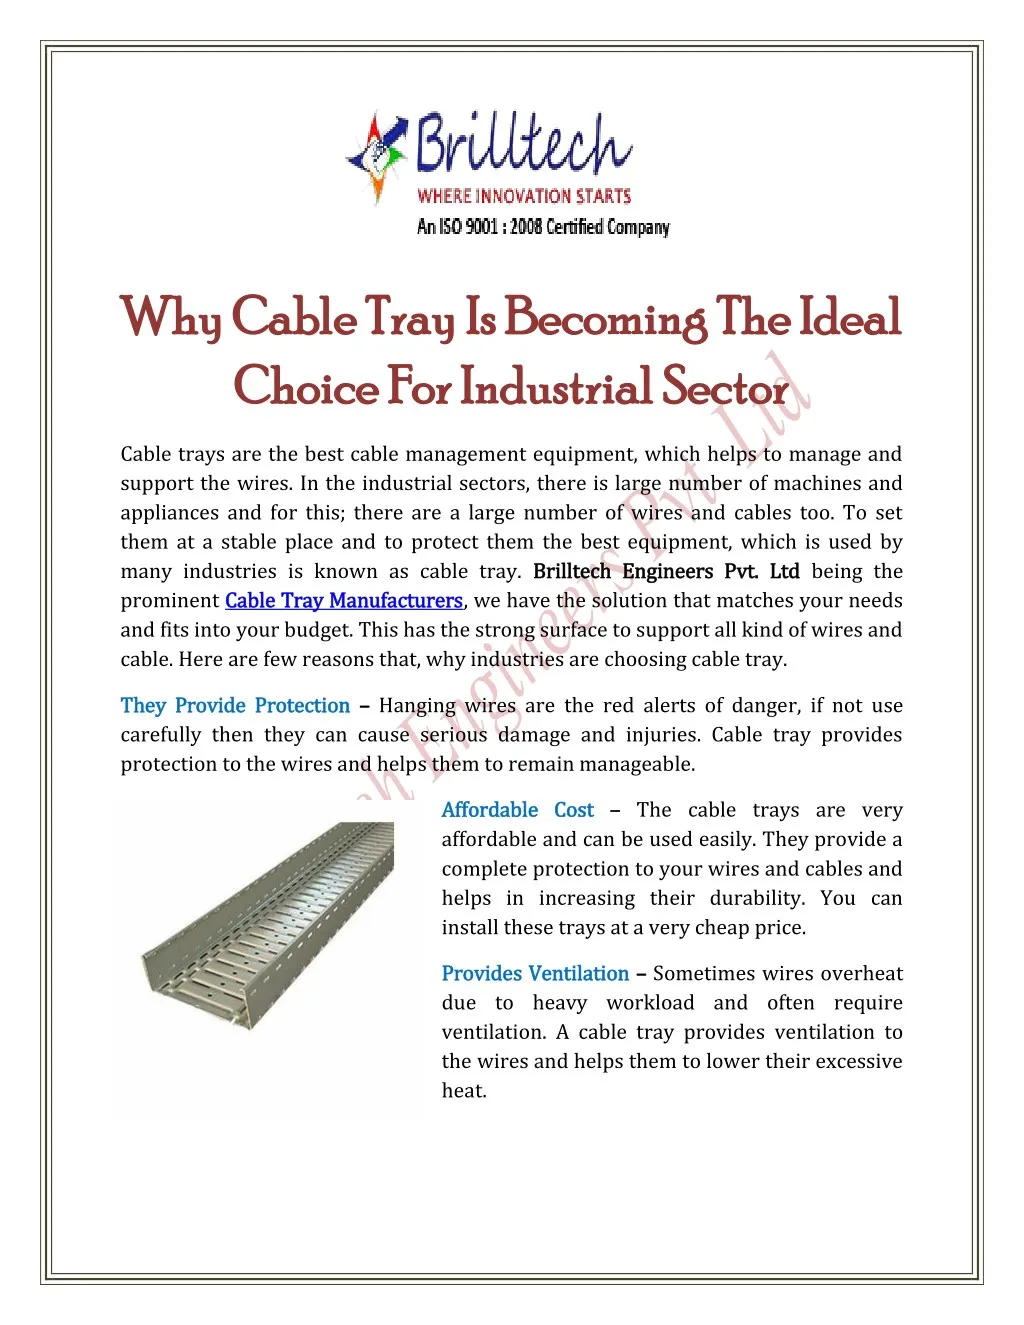 why cable tray why cable tray is is becoming